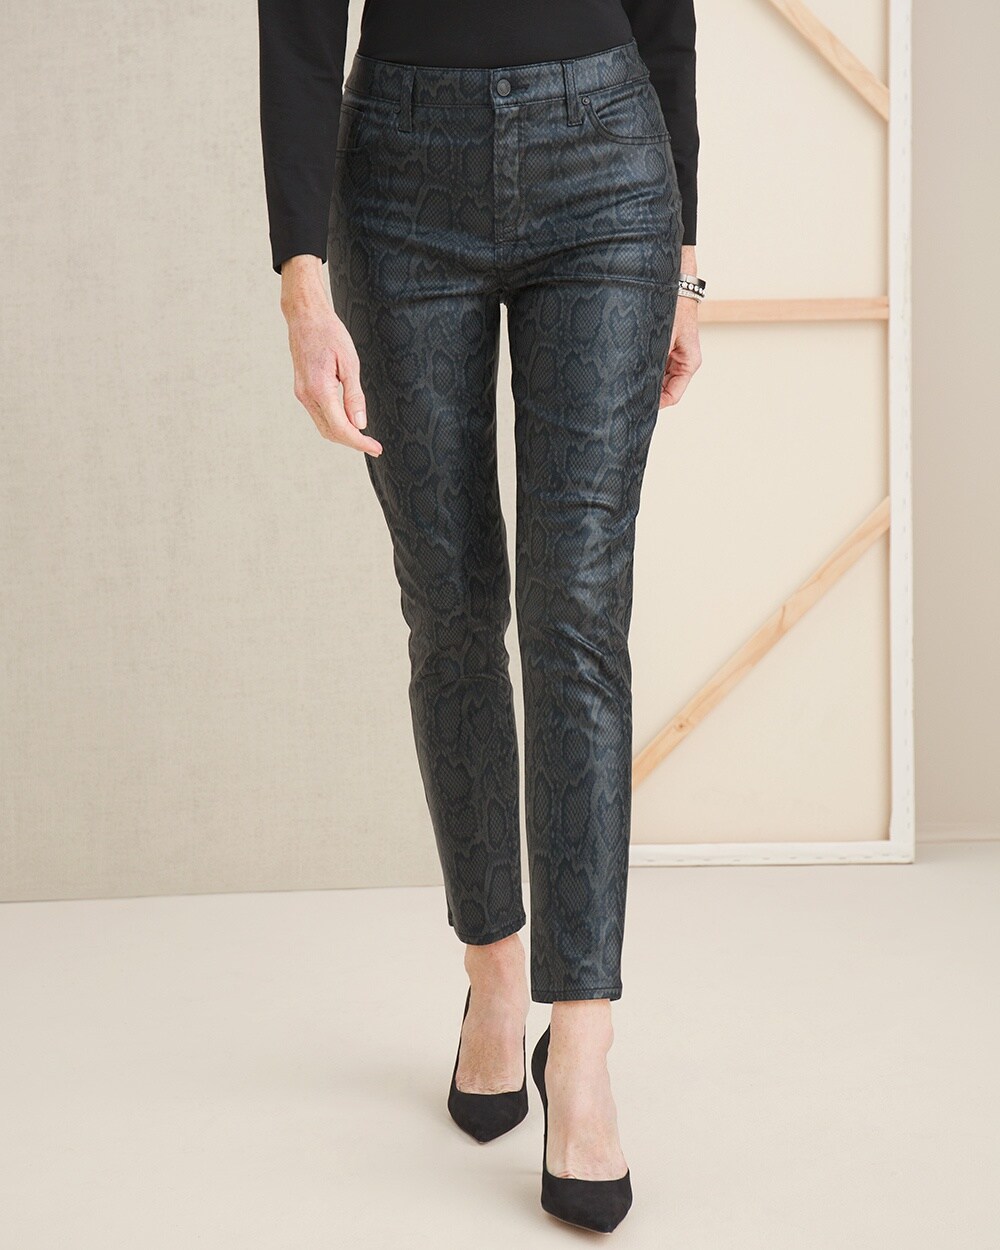 So Slimming Coated Snake-Print Ankle Jeans